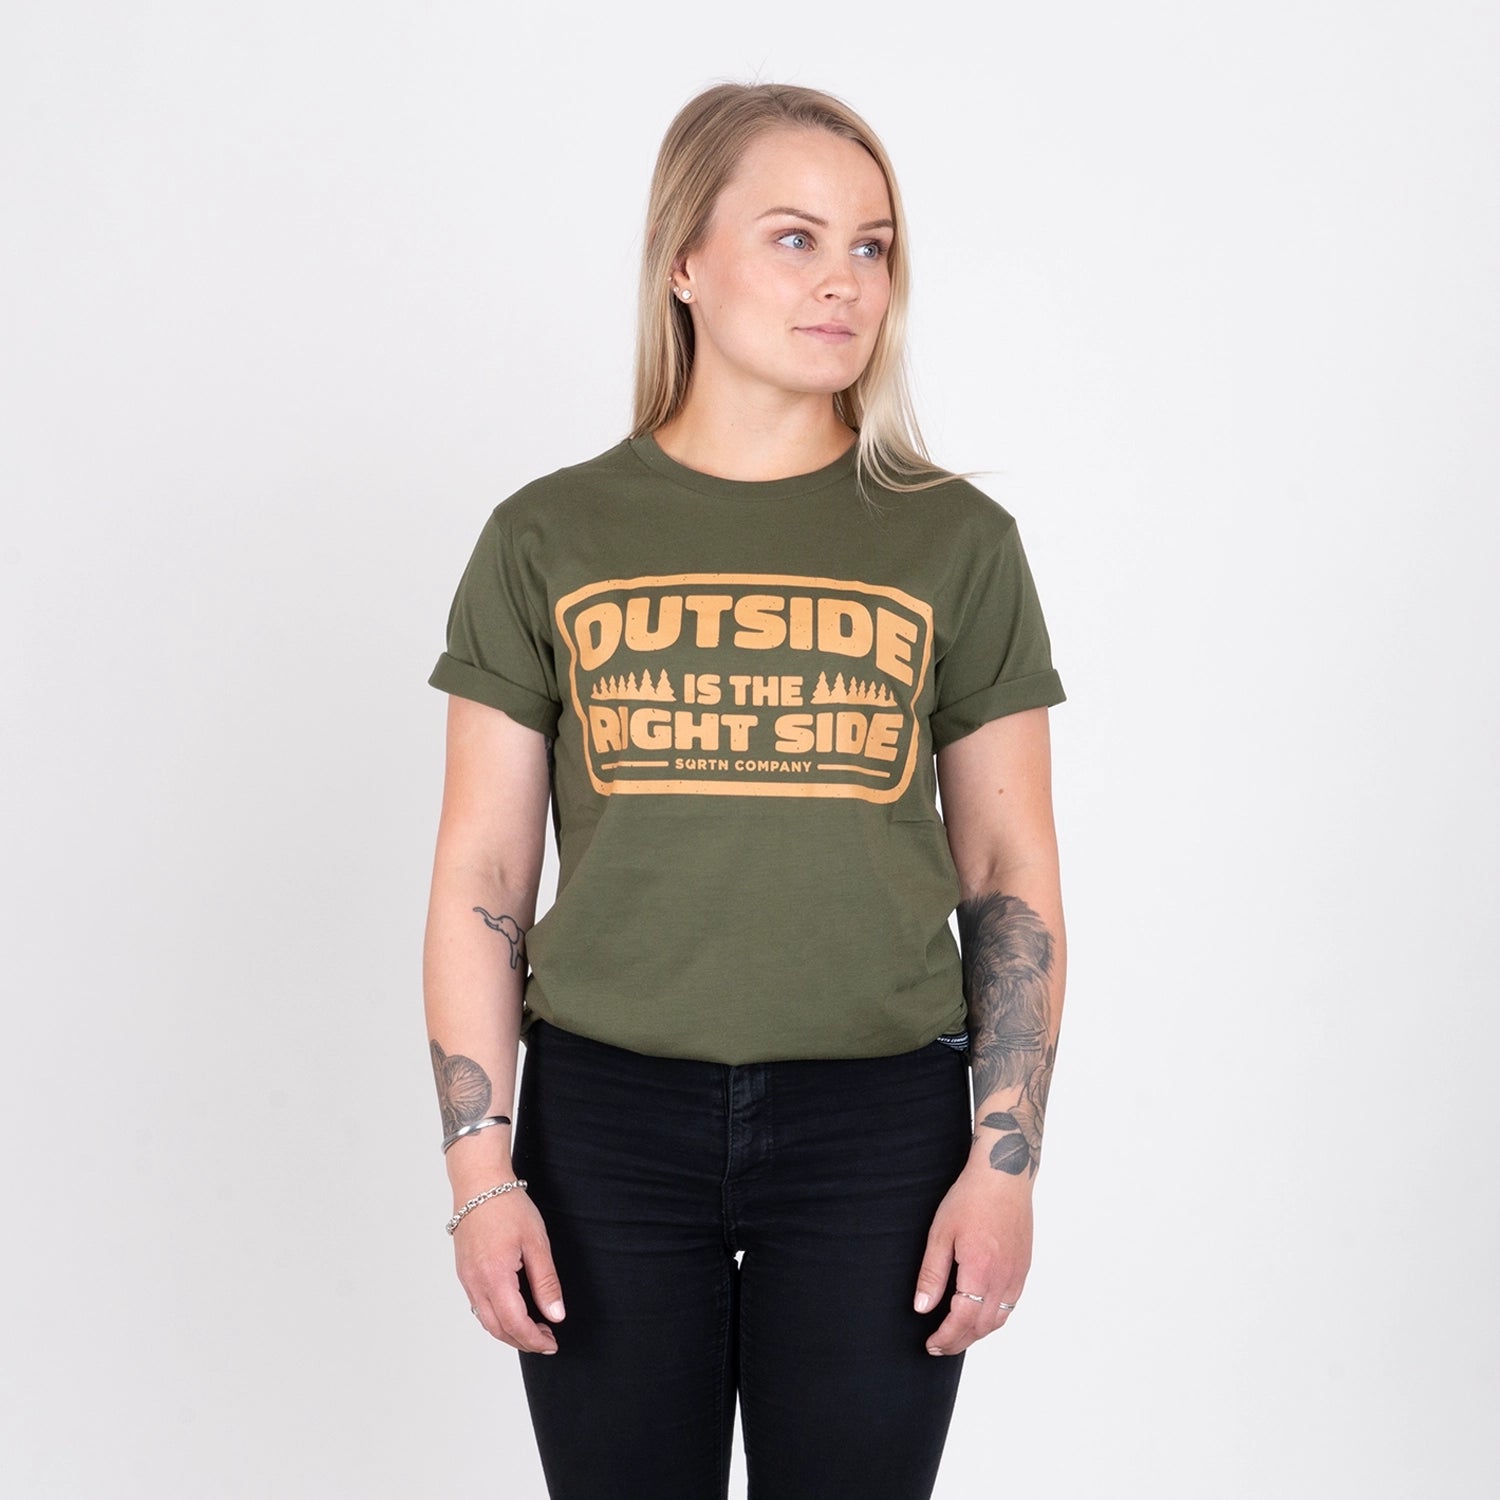 RIGHT SIDE T-SHIRT - RIFLE GREEN